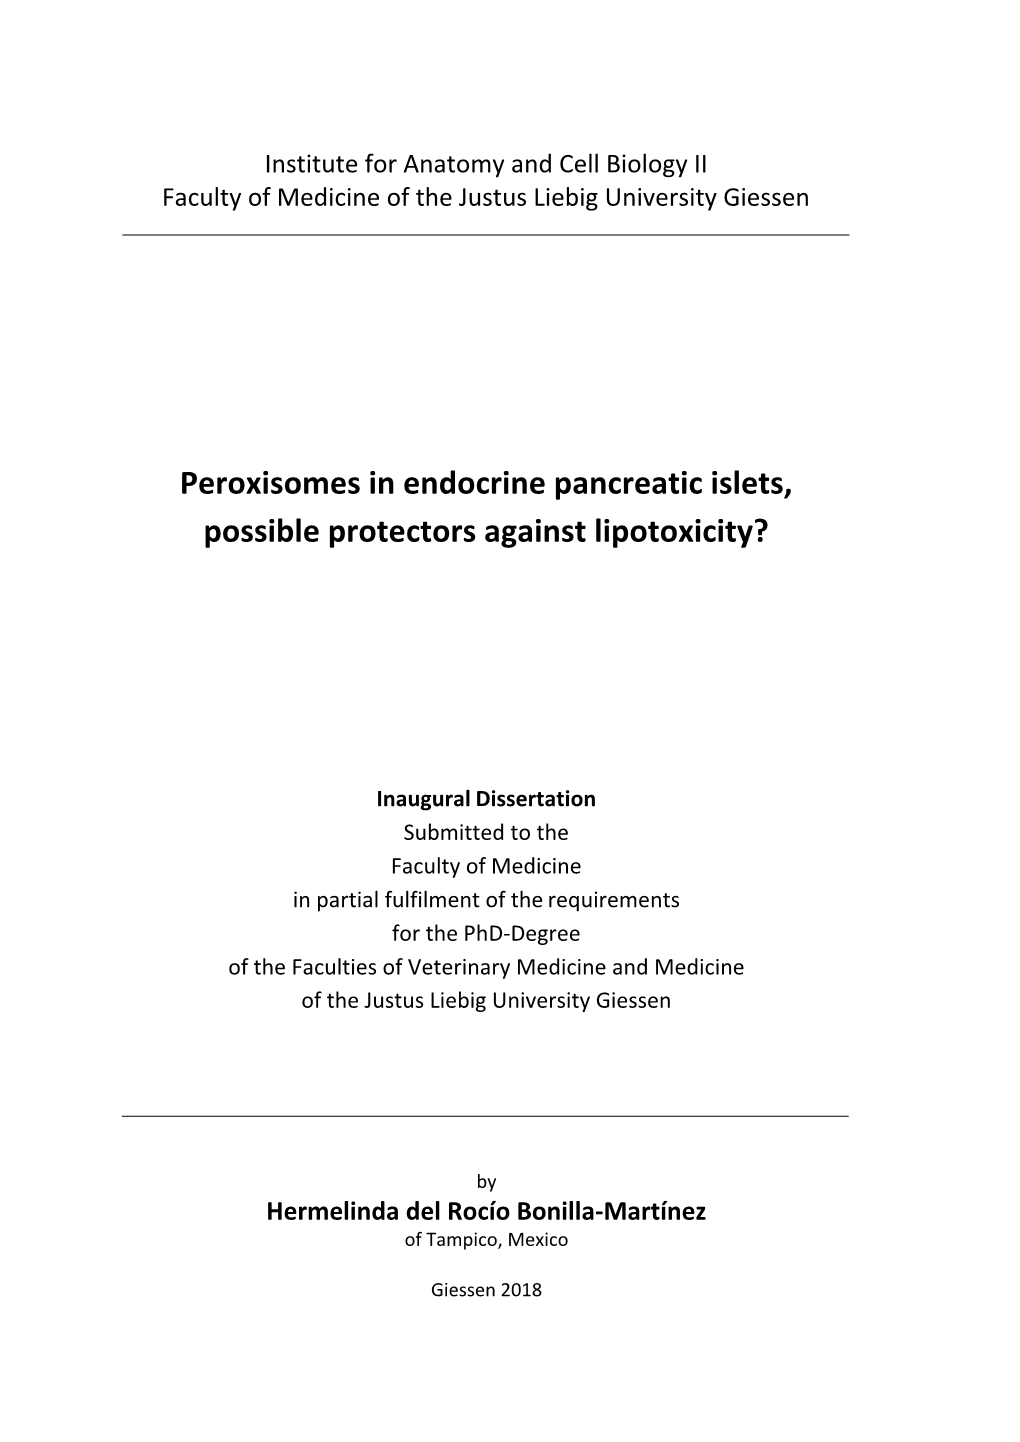 Peroxisomes in Endocrine Pancreatic Islets, Possible Protectors Against Lipotoxicity?